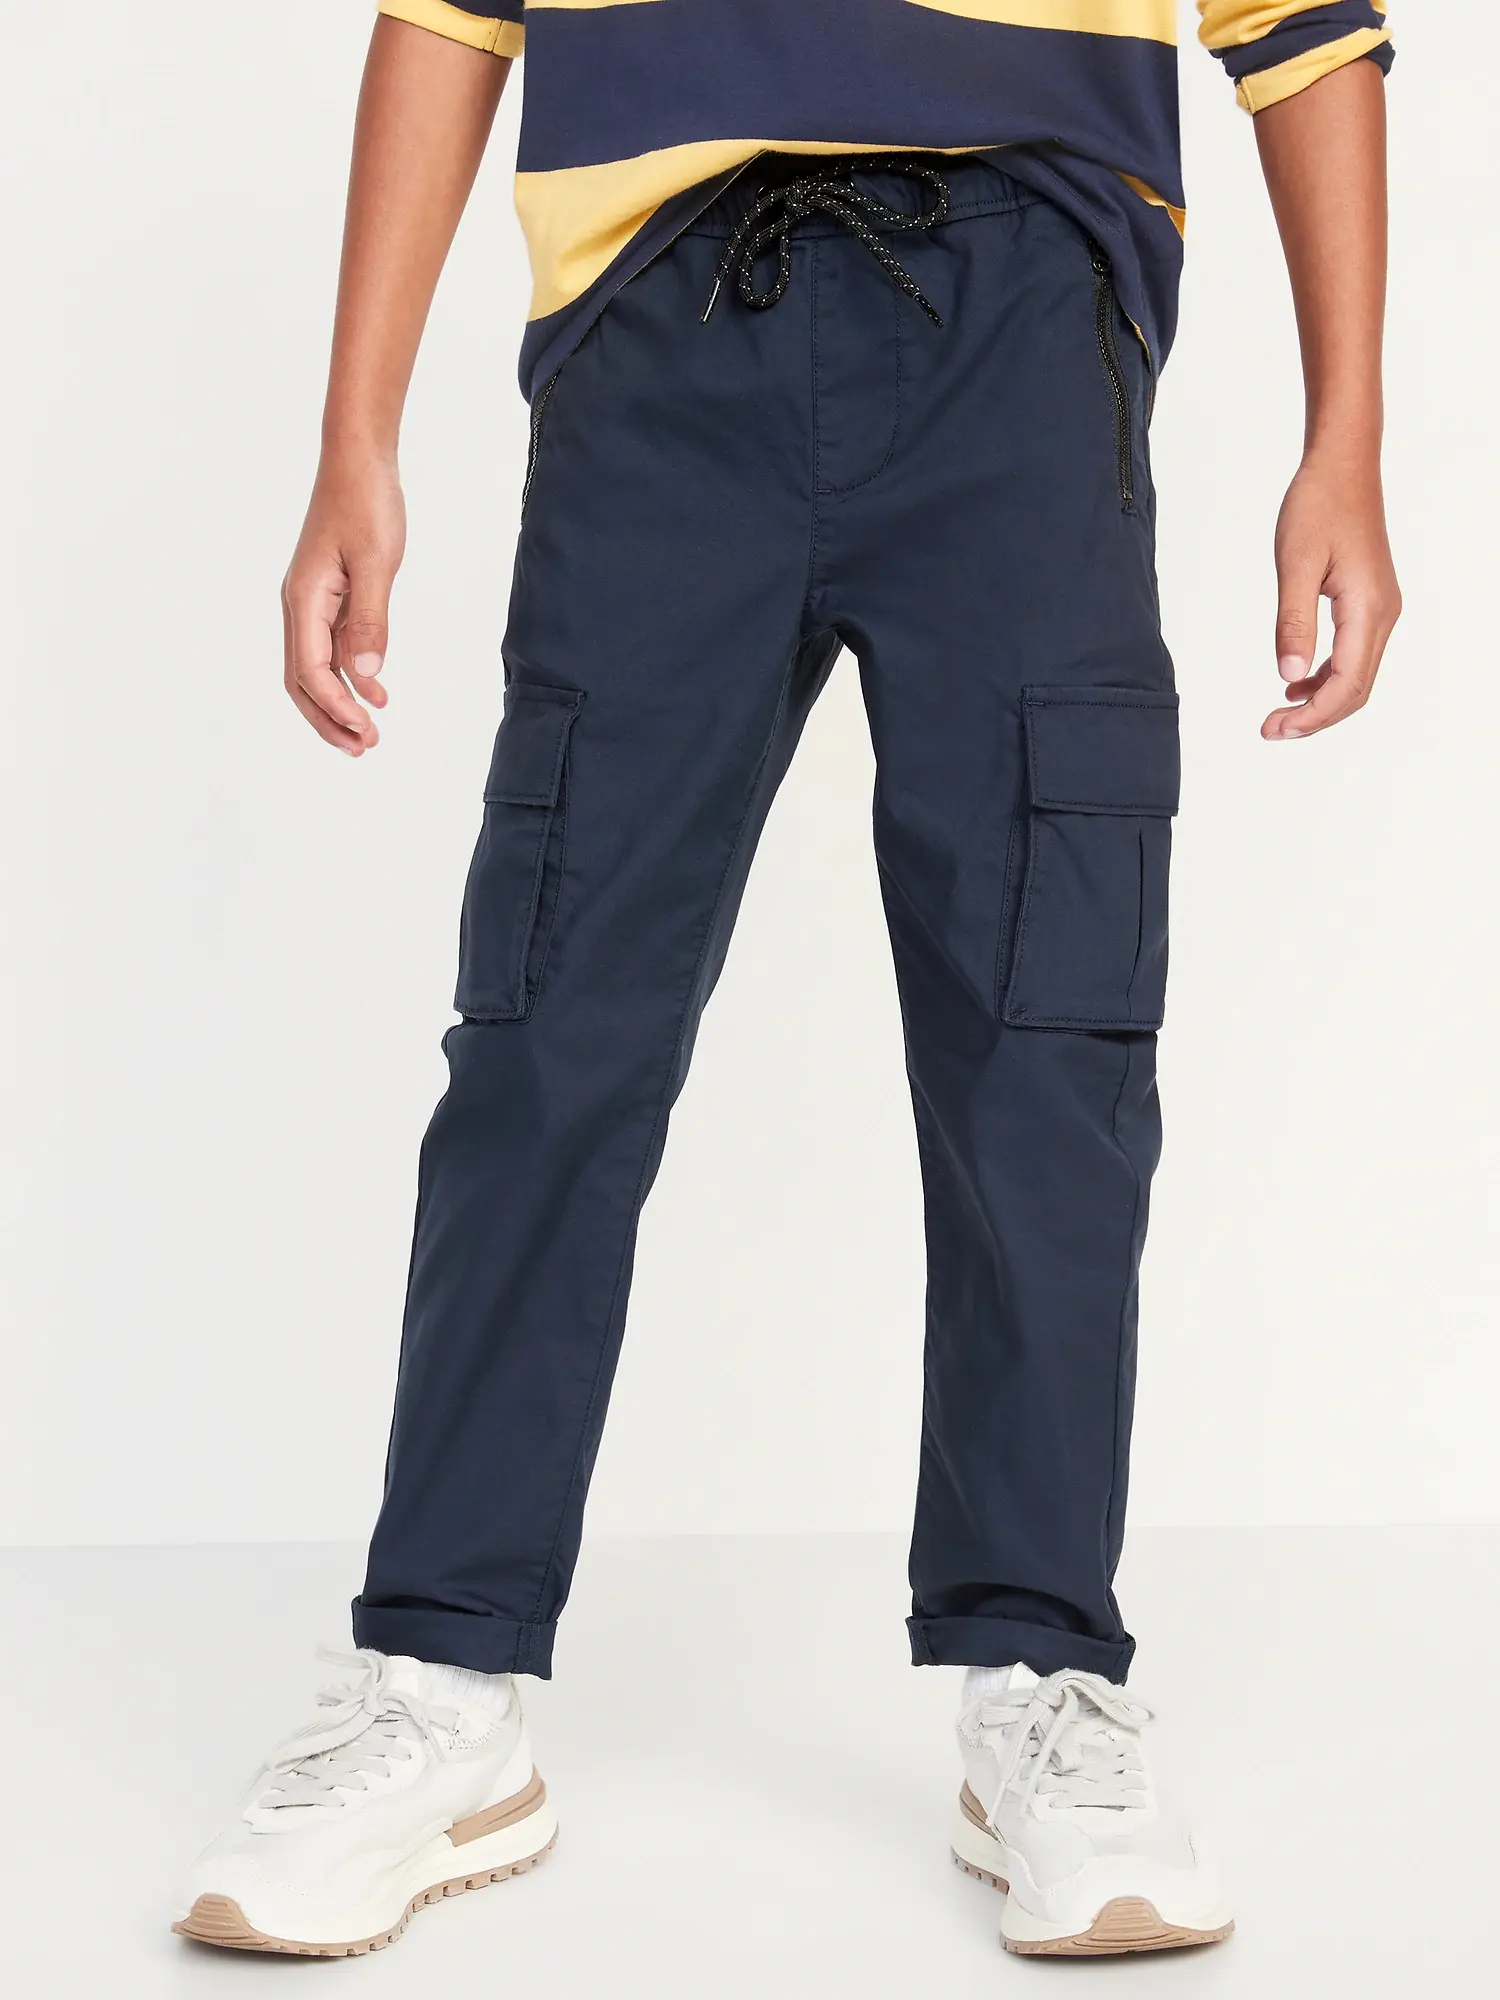 Old Navy Built-In Flex Tapered Tech Cargo Chino Pants for Boys blue. 1